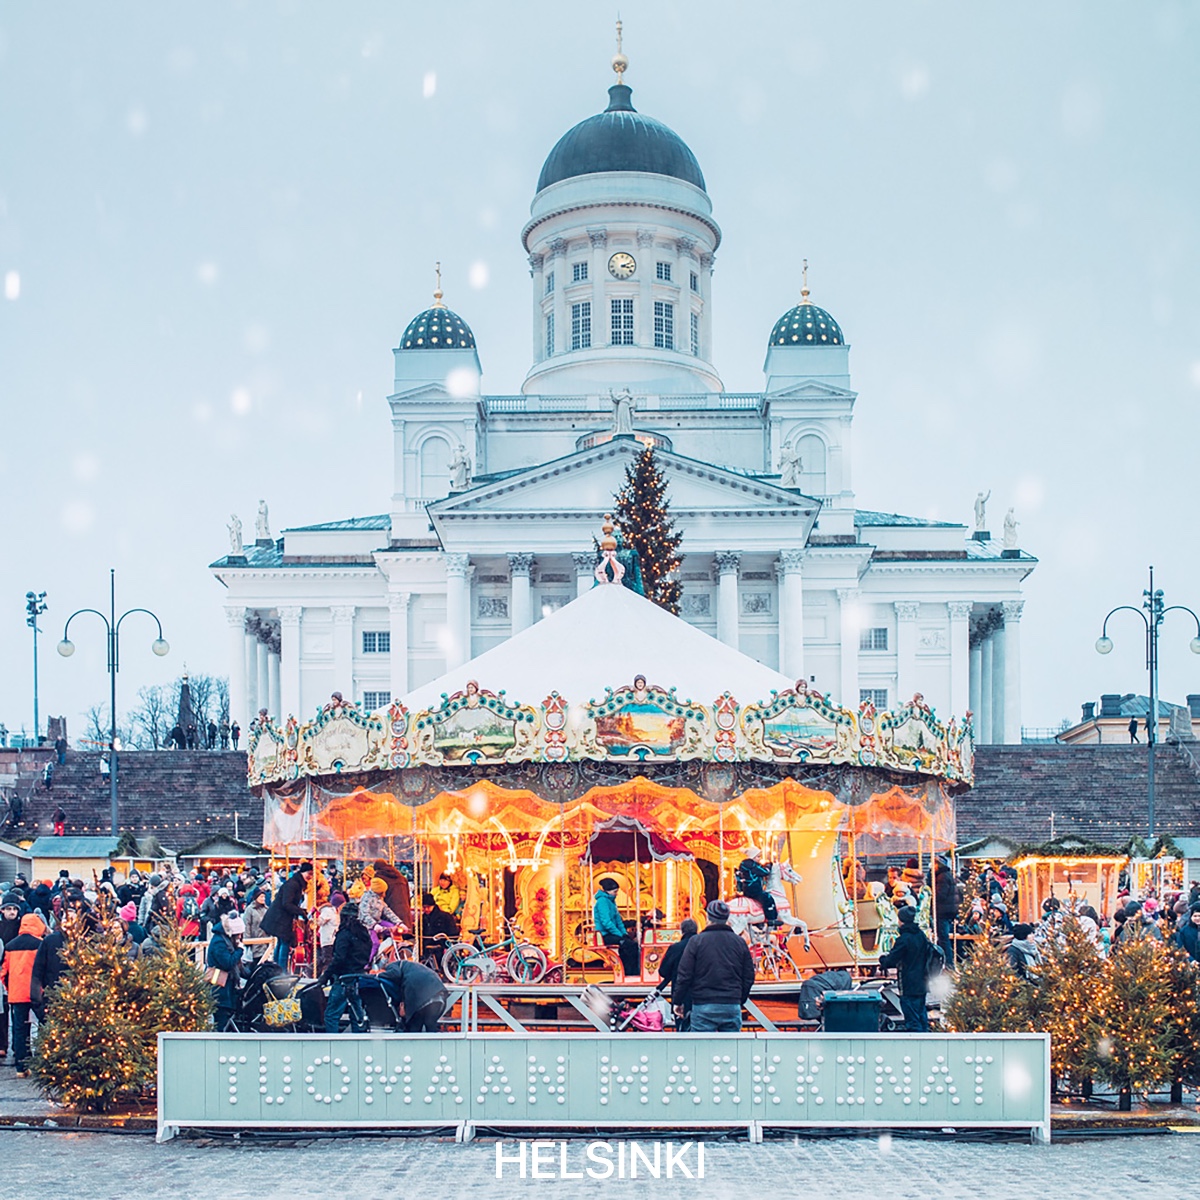 Looking forward to the festive season, Here is a picture from Helsinki.

#visualmuse #visual #muse #creative #powerhouse #creativepowerhouse #content #creation #contentcreation #success #business https://t.co/gsw77ttm4O